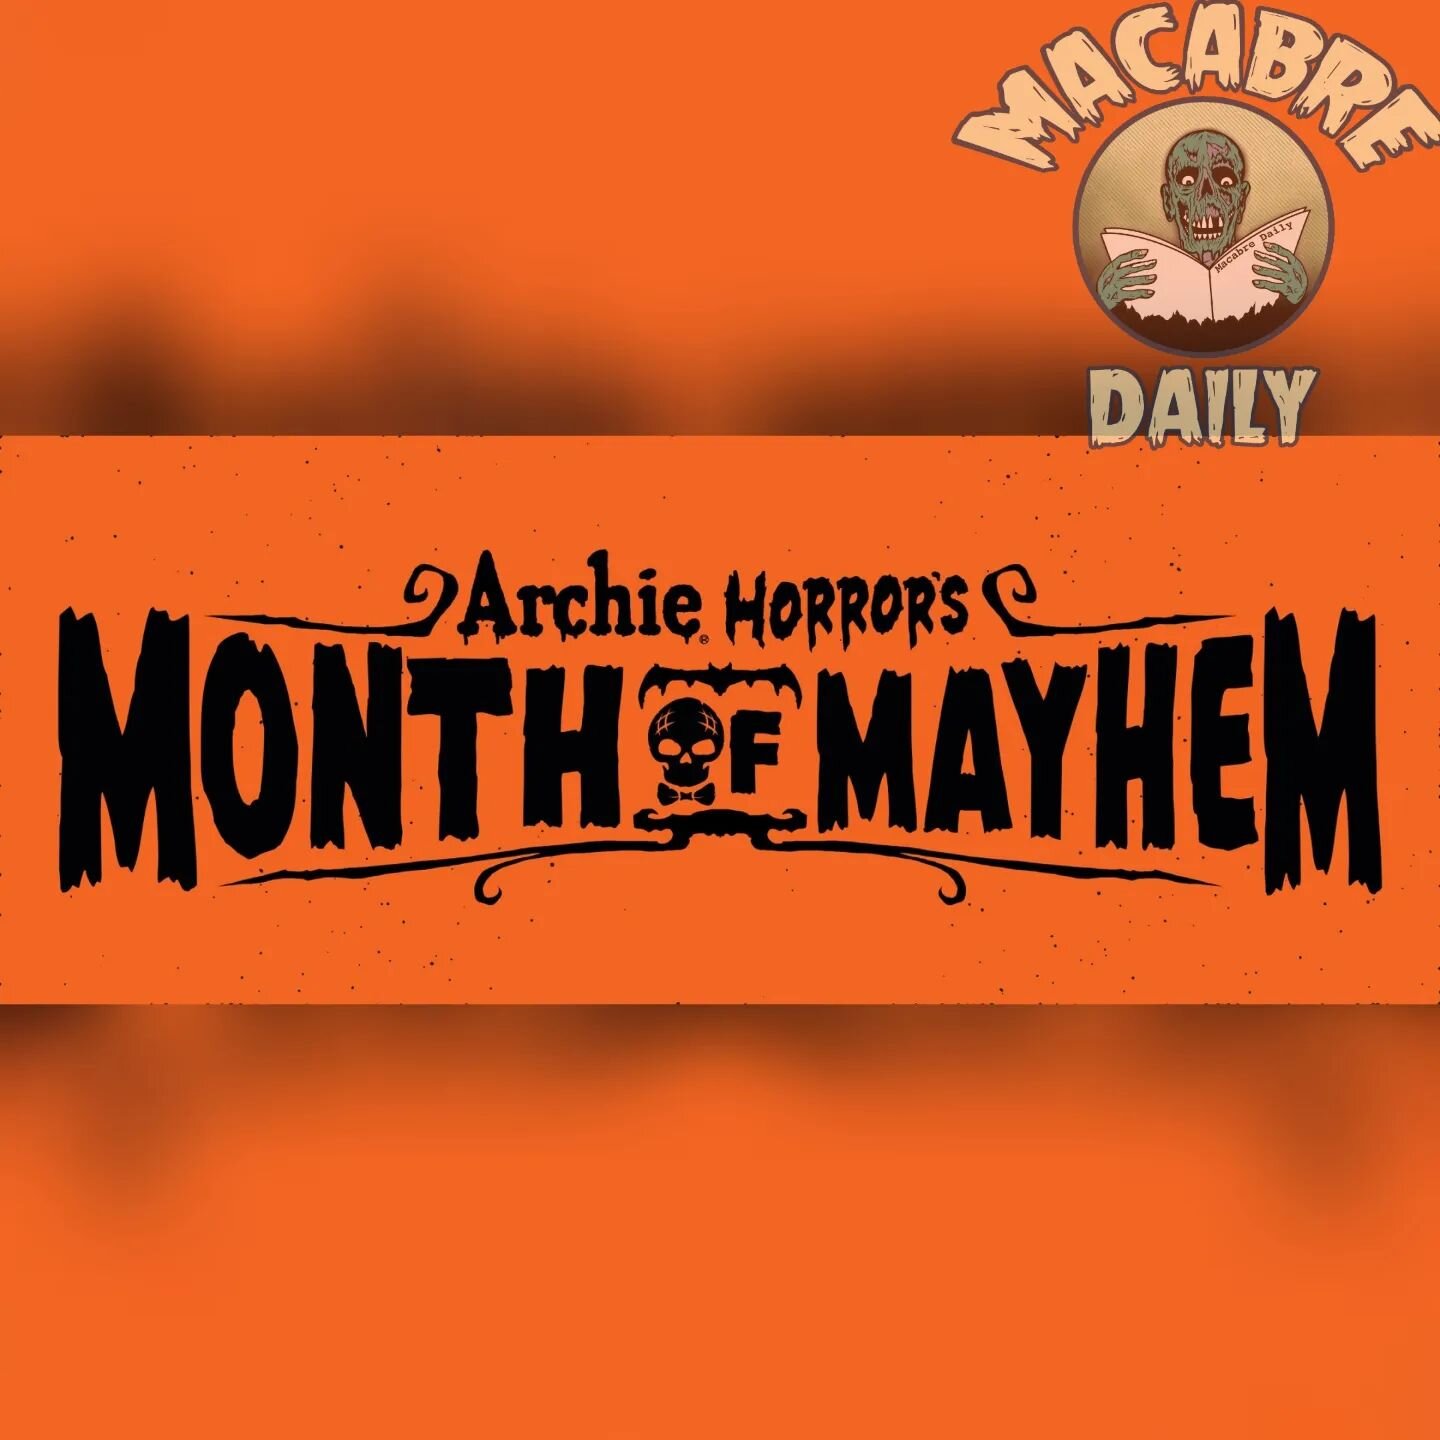 Archie Coming In Hot With Horror Up The Ying Yang!

ARCHIE HORROR'S &quot;MONTH OF MAYHEM&quot;

Check out @brisbane_joker sneak peek at Macabredaily.com